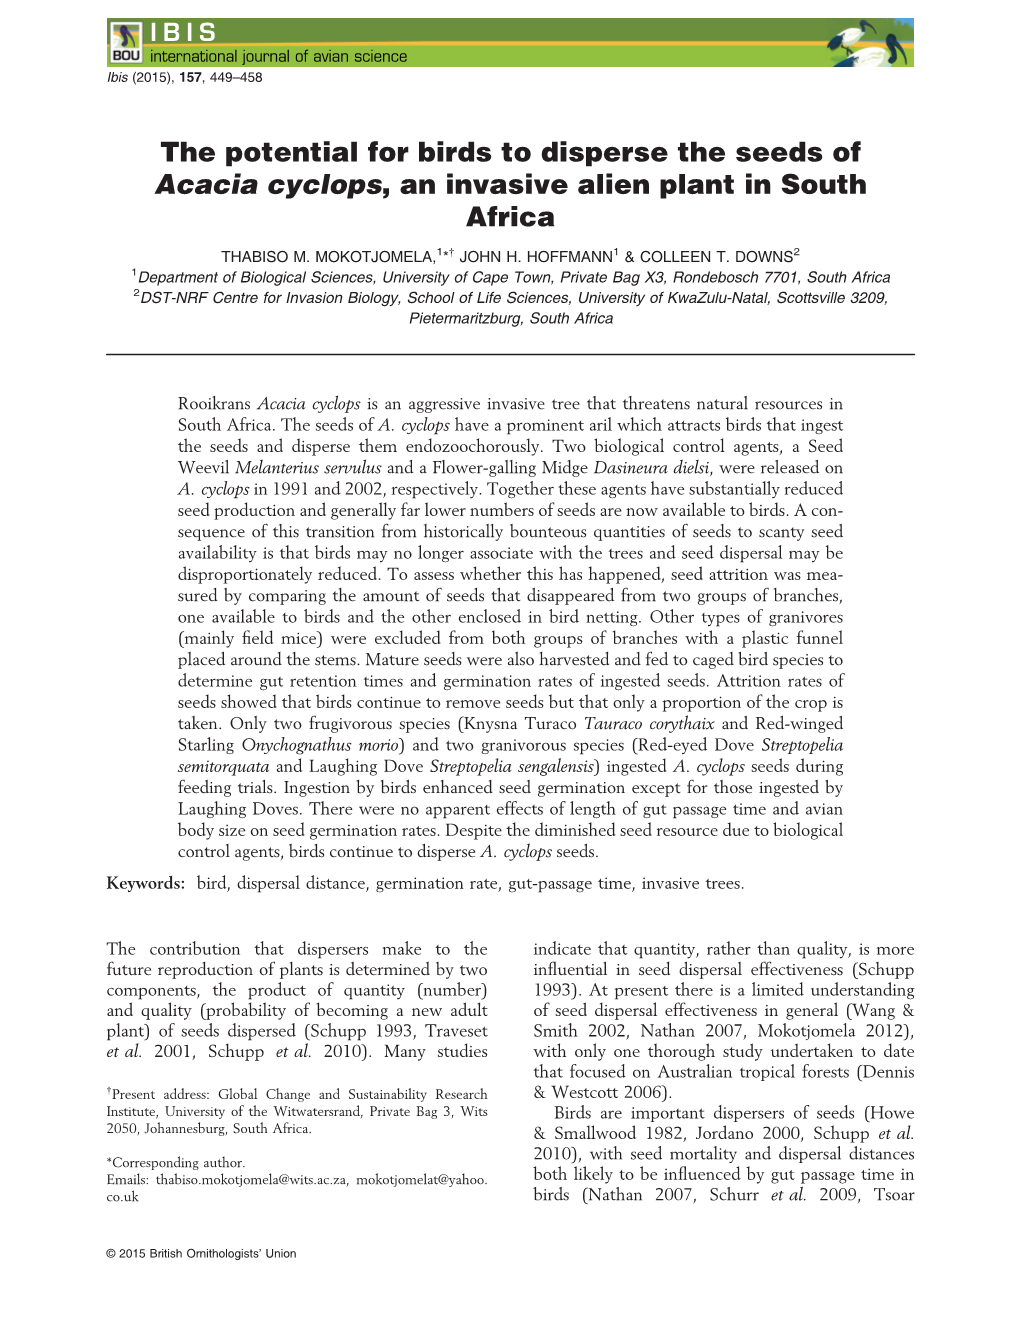 The Potential for Birds to Disperse the Seeds of Acacia Cyclops, an Invasive Alien Plant in South Africa